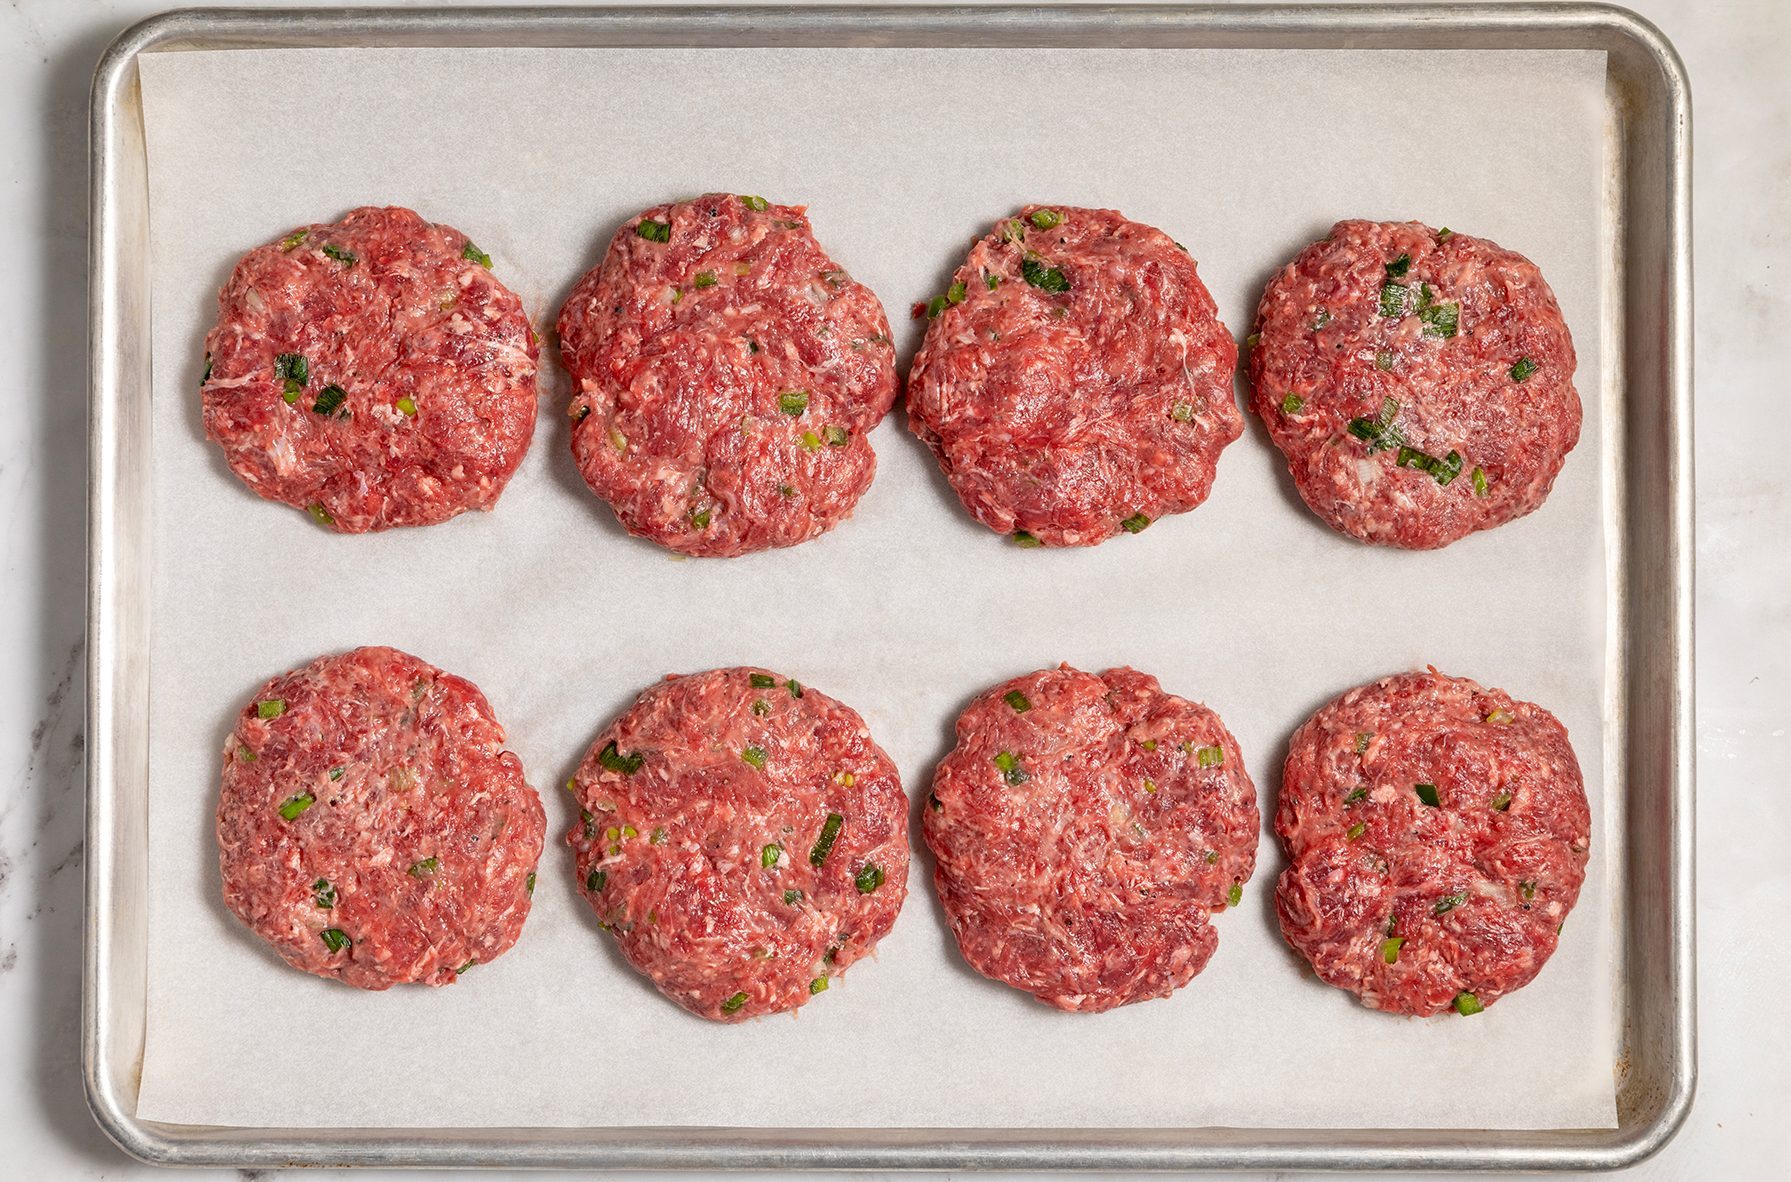 Eight raw beef patties with green seasoning flecks are evenly spaced on a parchment-lined baking sheet. 